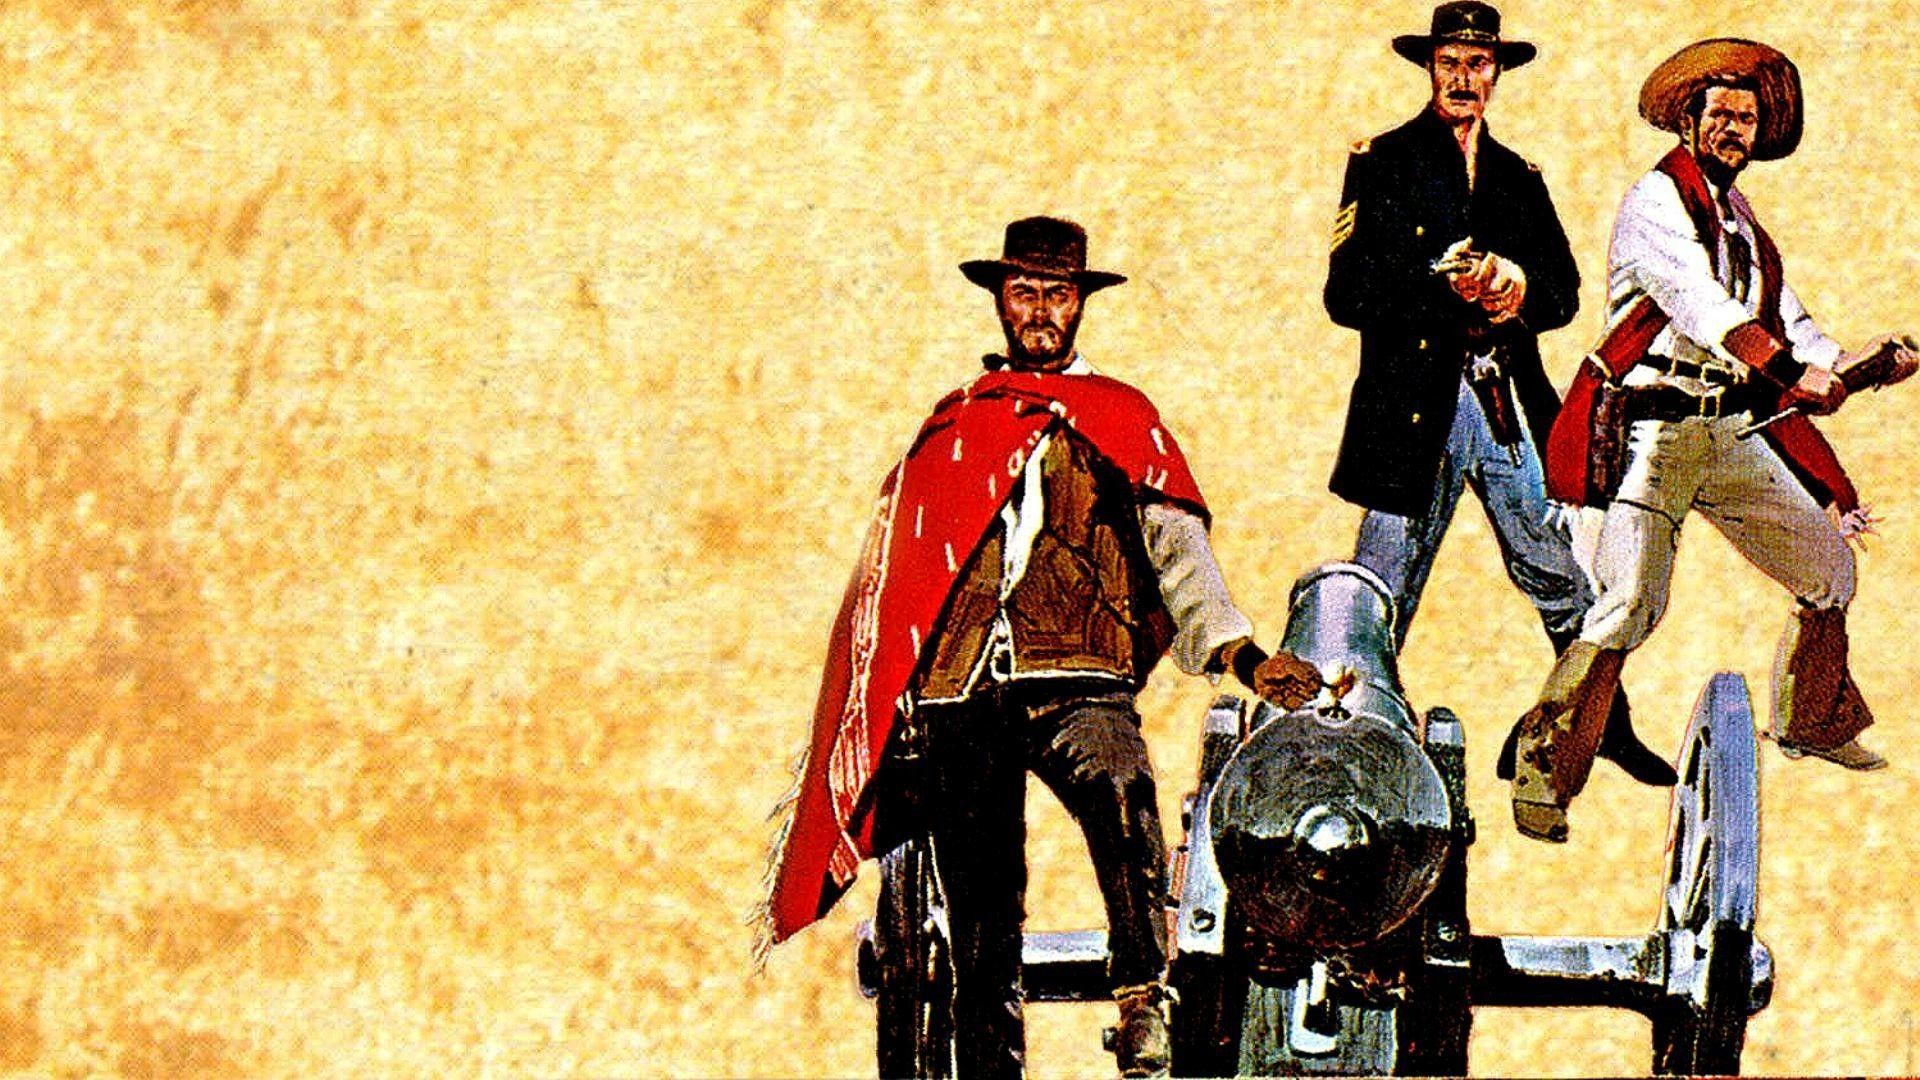 THE GOOD THE BAD AND THE UGLY western t wallpapers